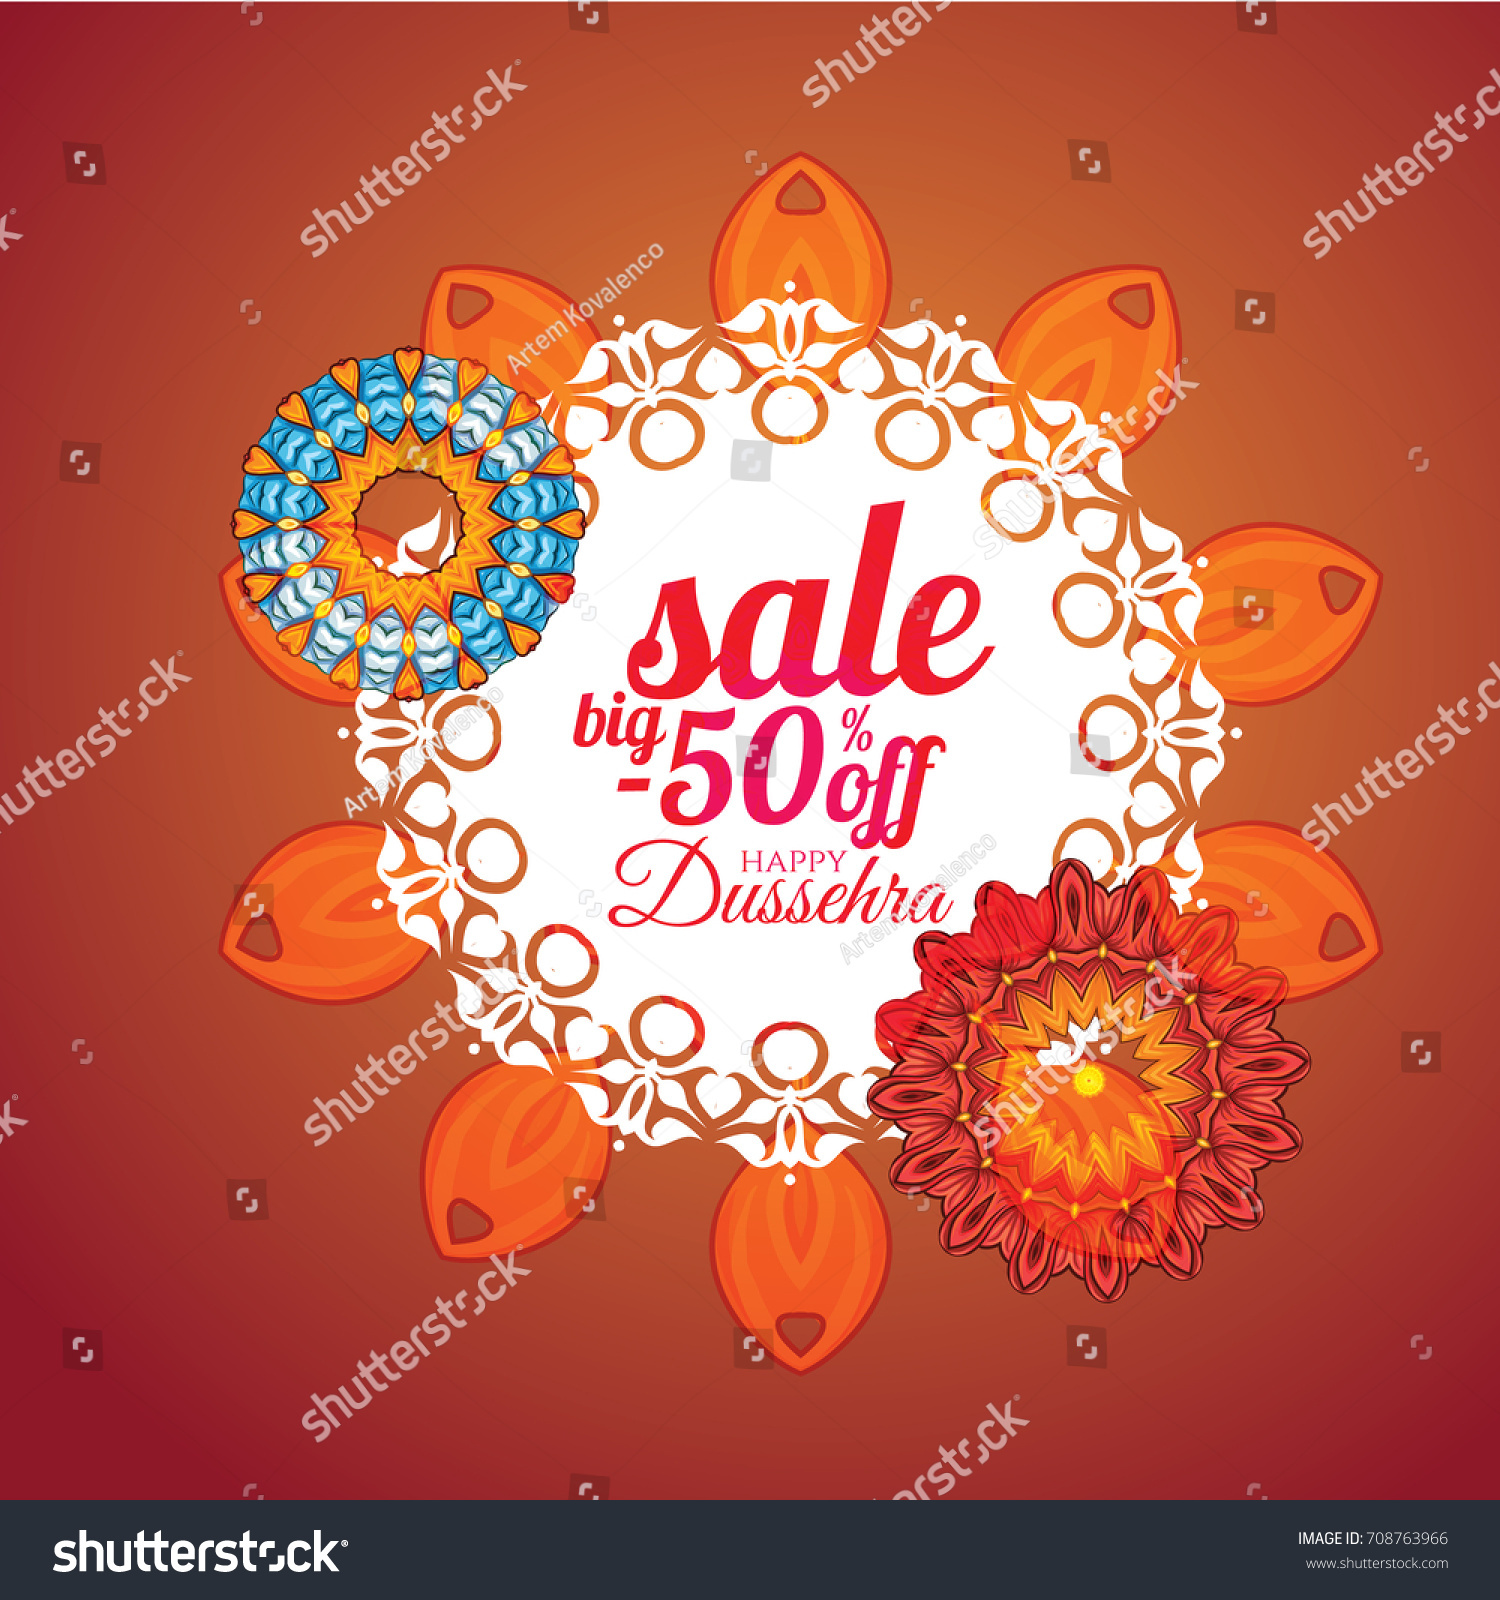 vector illustration indian holiday happy dussehra stock vector royalty free 708763966 shutterstock